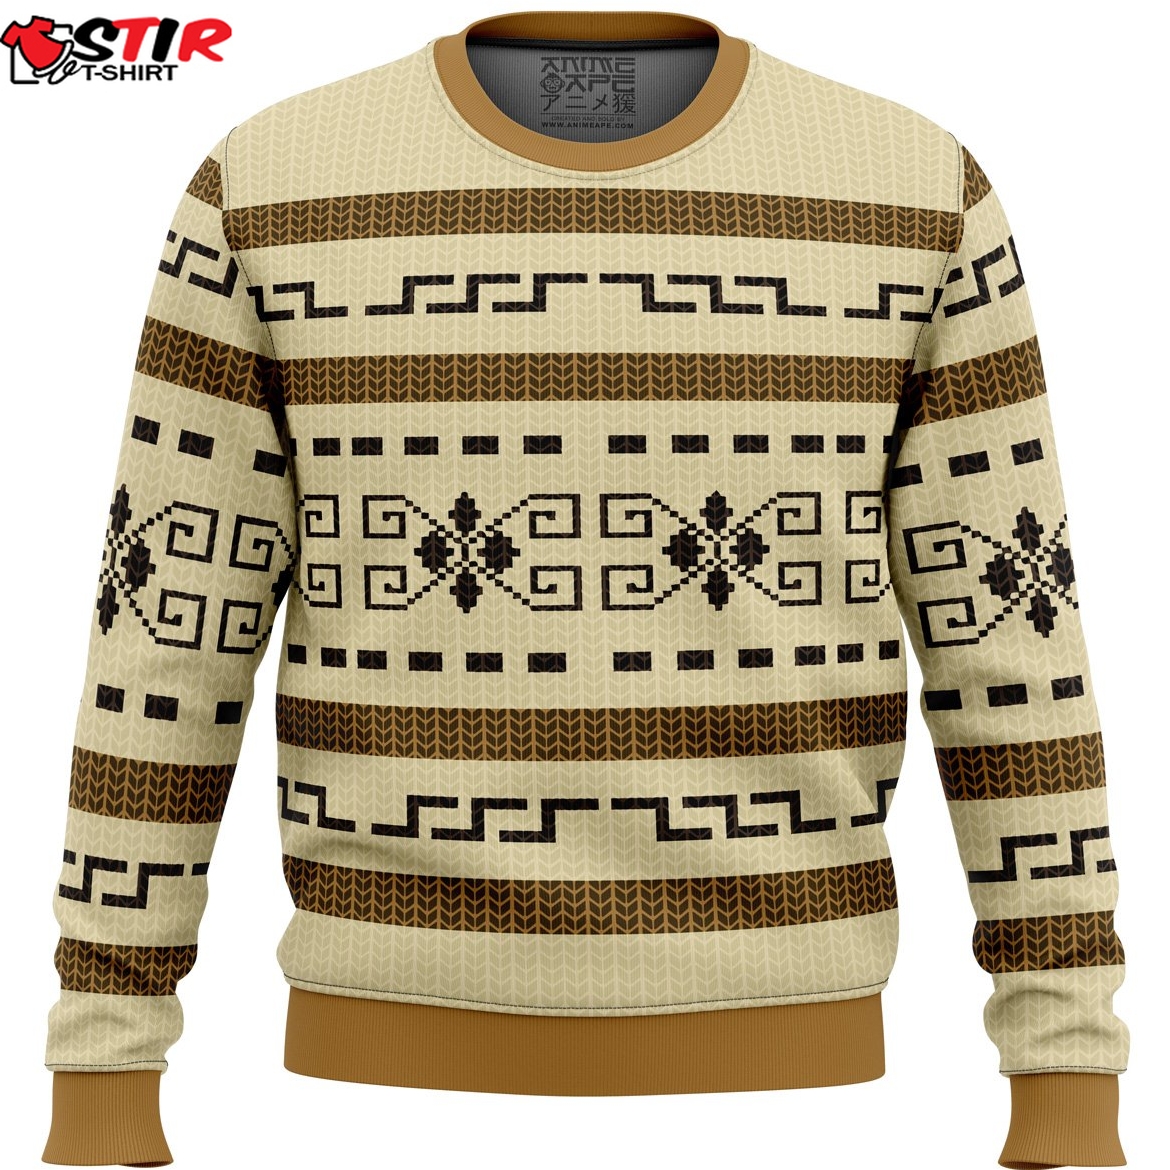 The DudeS Ugly Christmas Sweater Stirtshirt